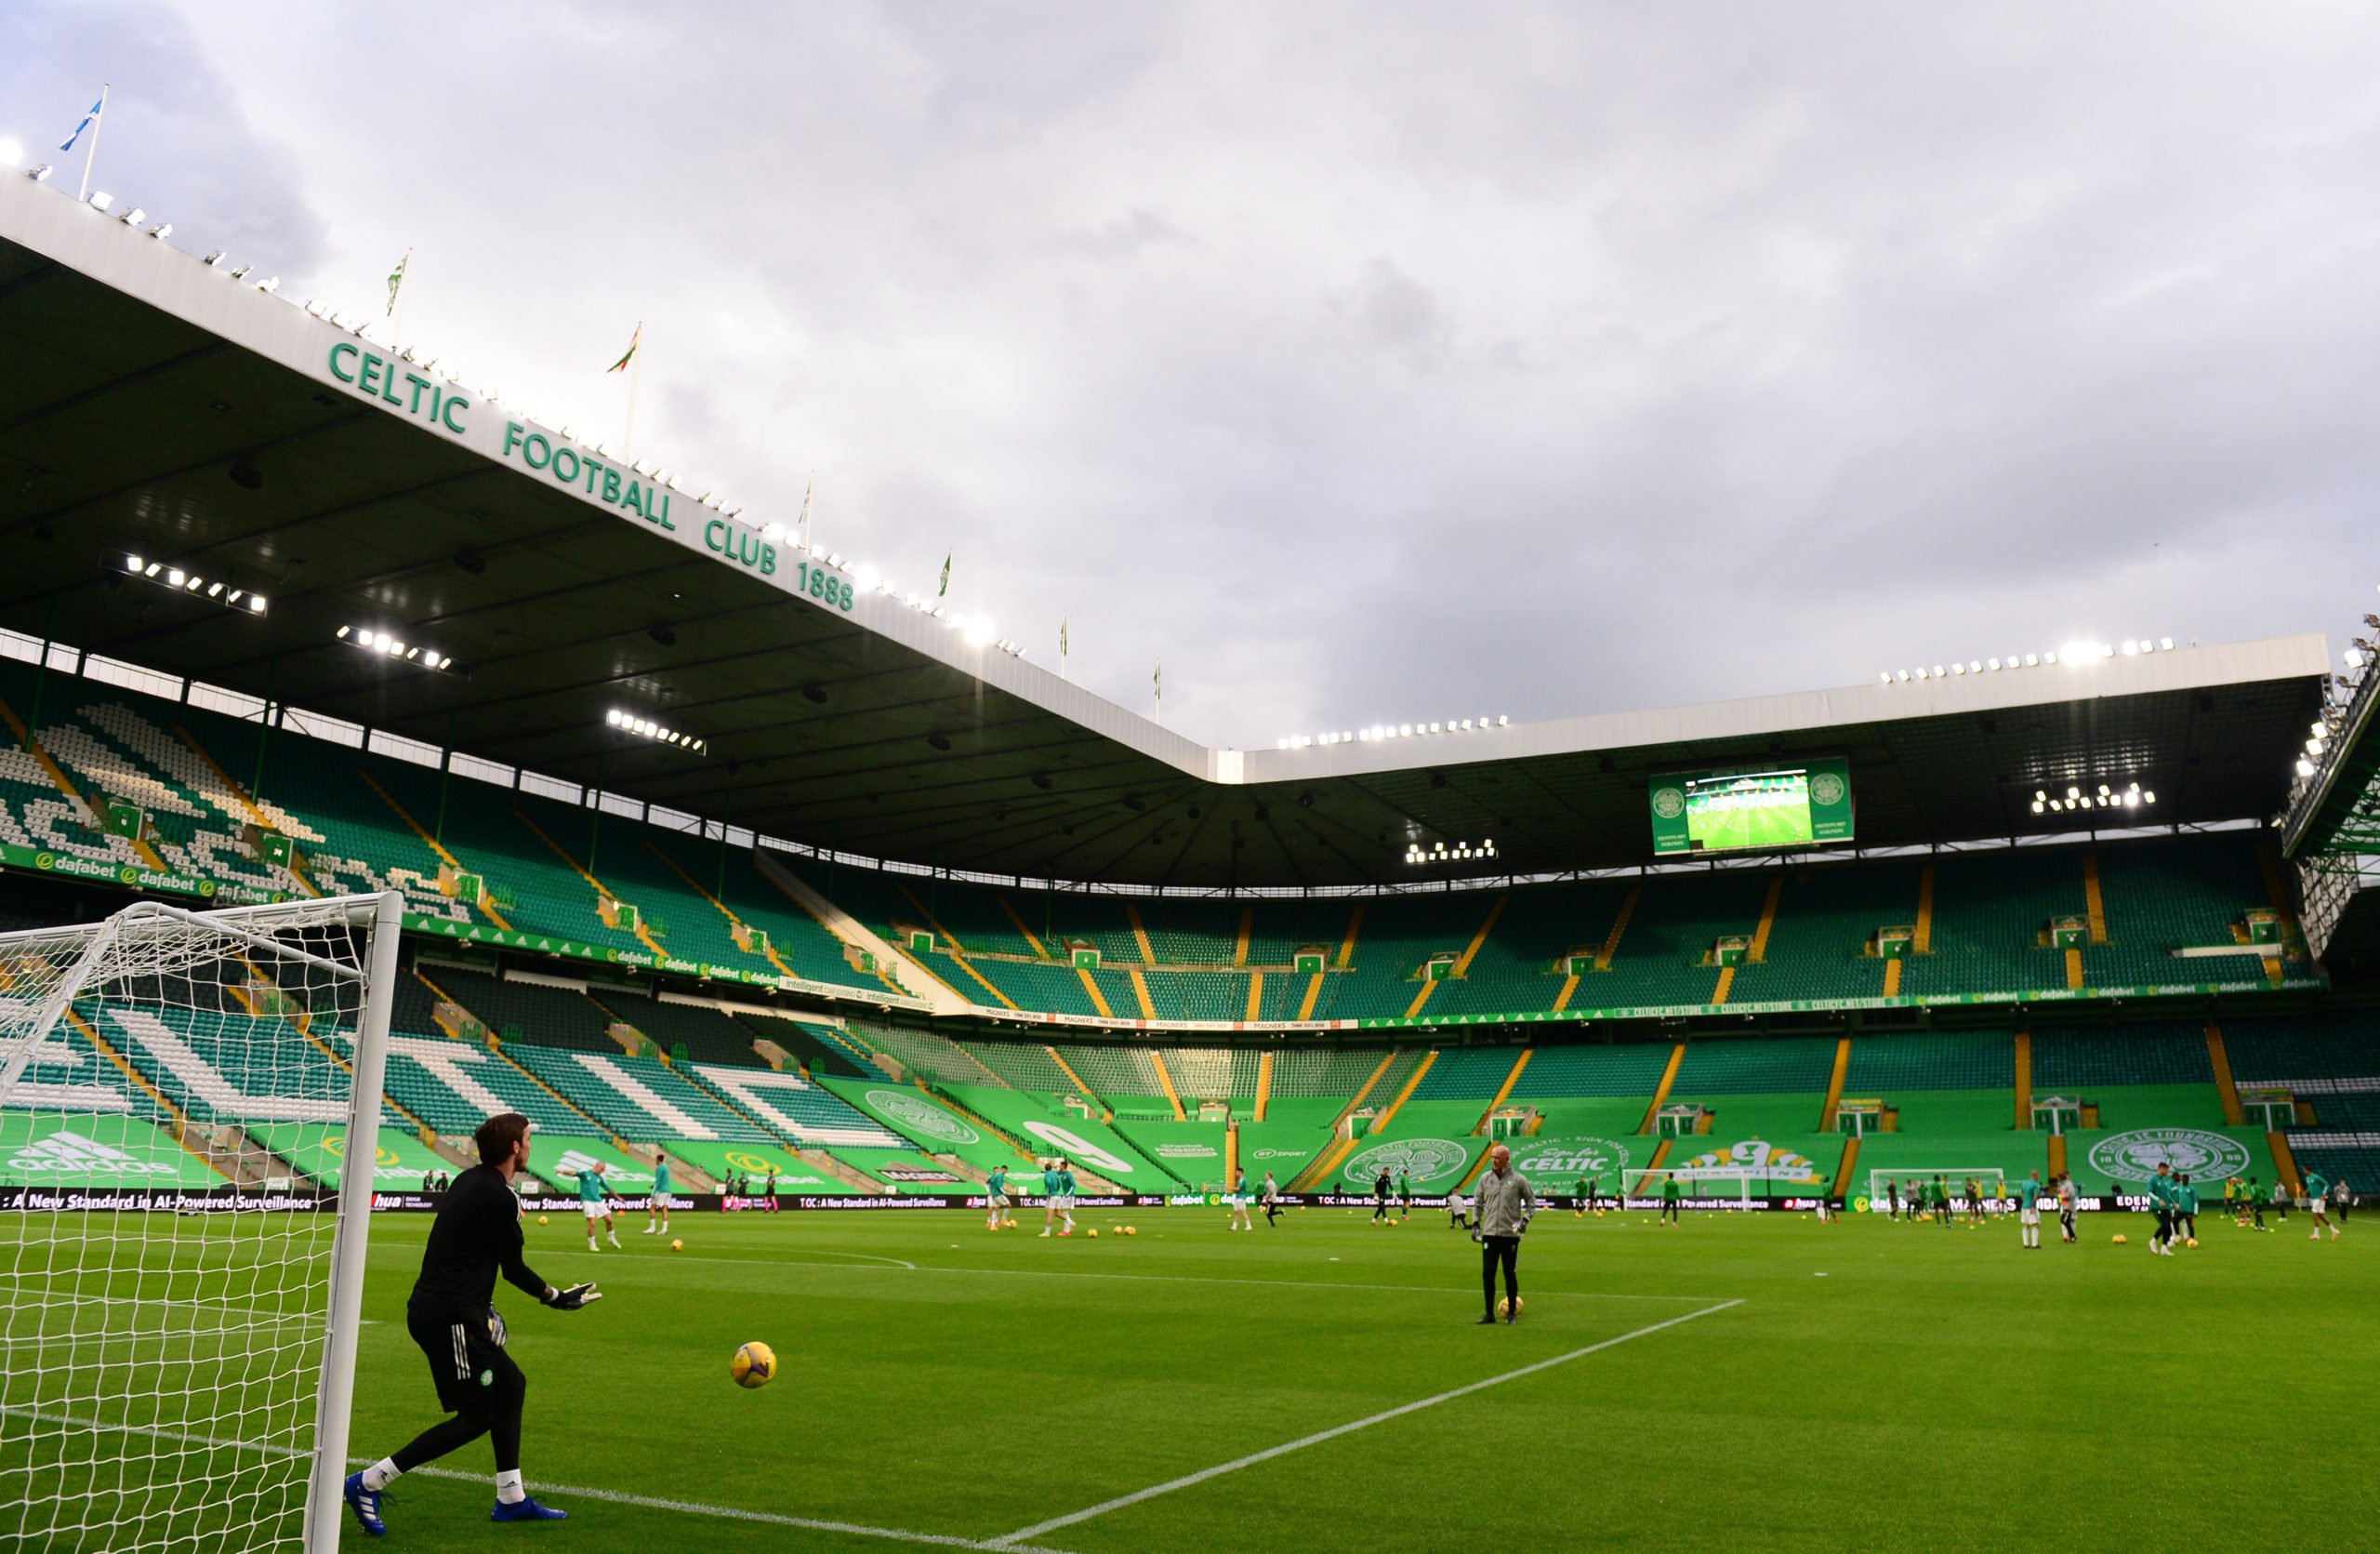 Celtic Park is scheduled to host the first derby of the season